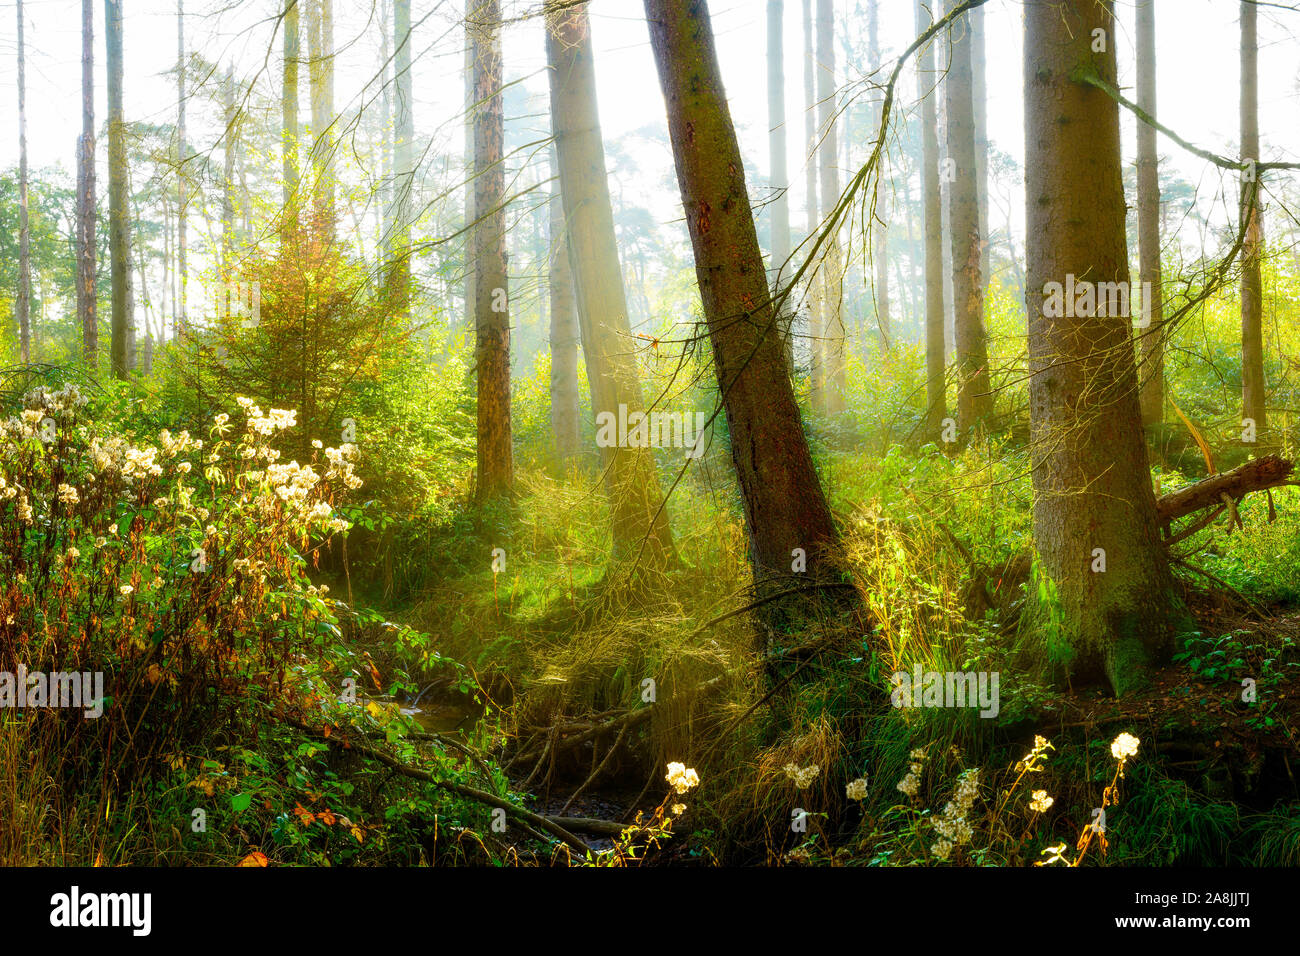 Autumn forest with spruce trees and bright sunlight in the fog Stock Photo